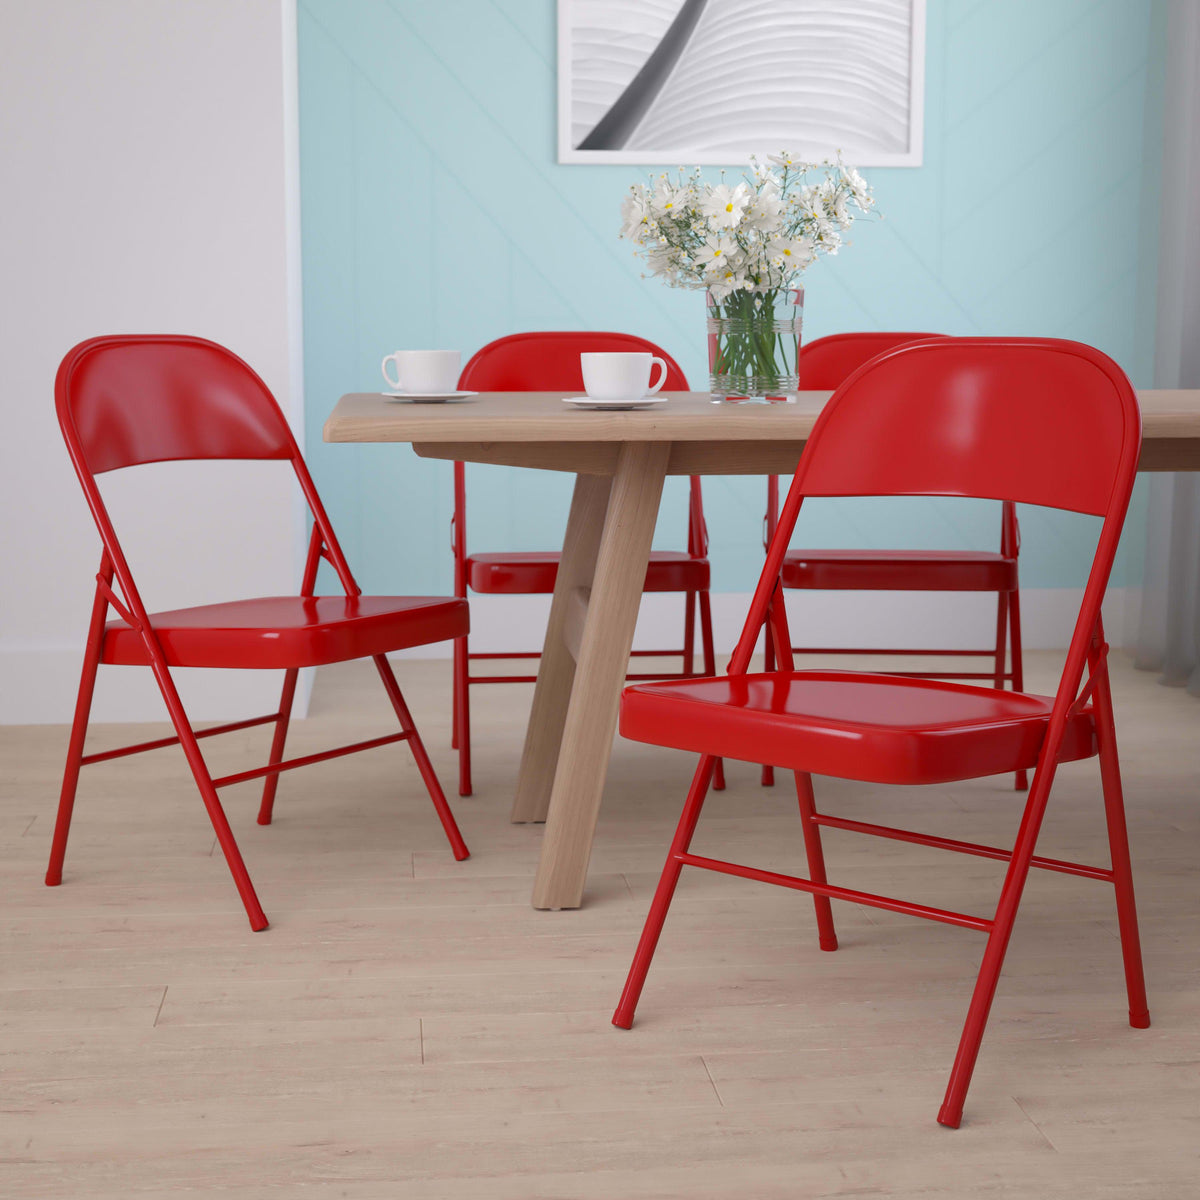 Red |#| Double Braced Red Metal Folding Chair - Event Chair - Portable Chair